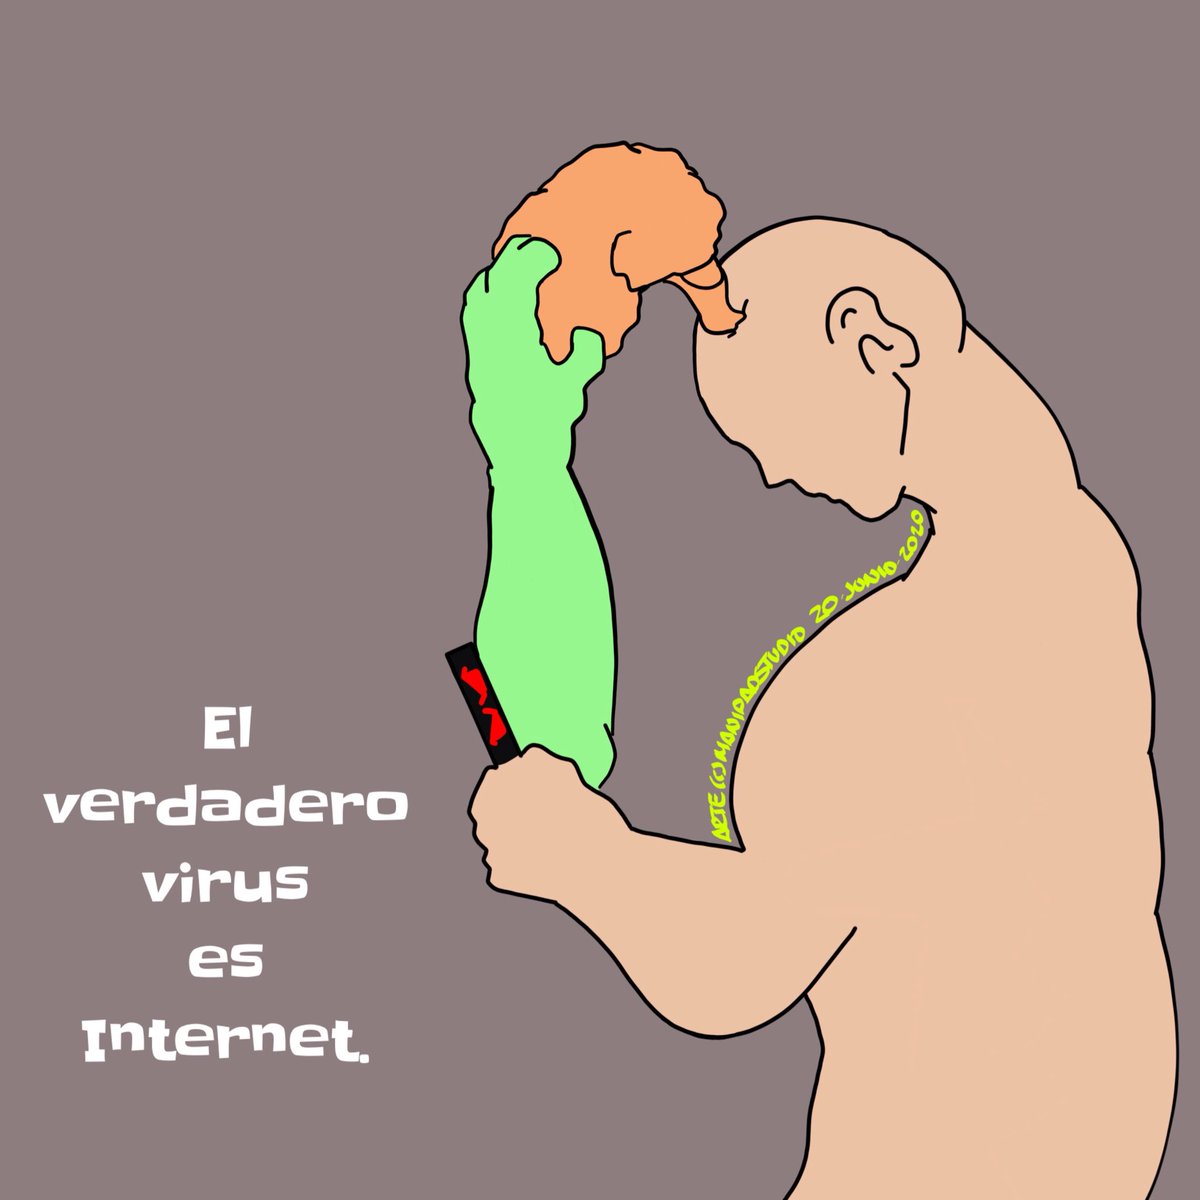 The most #dangerous #virus is #internet
#meditationquote #quoteoftheday #quotesaboutlife